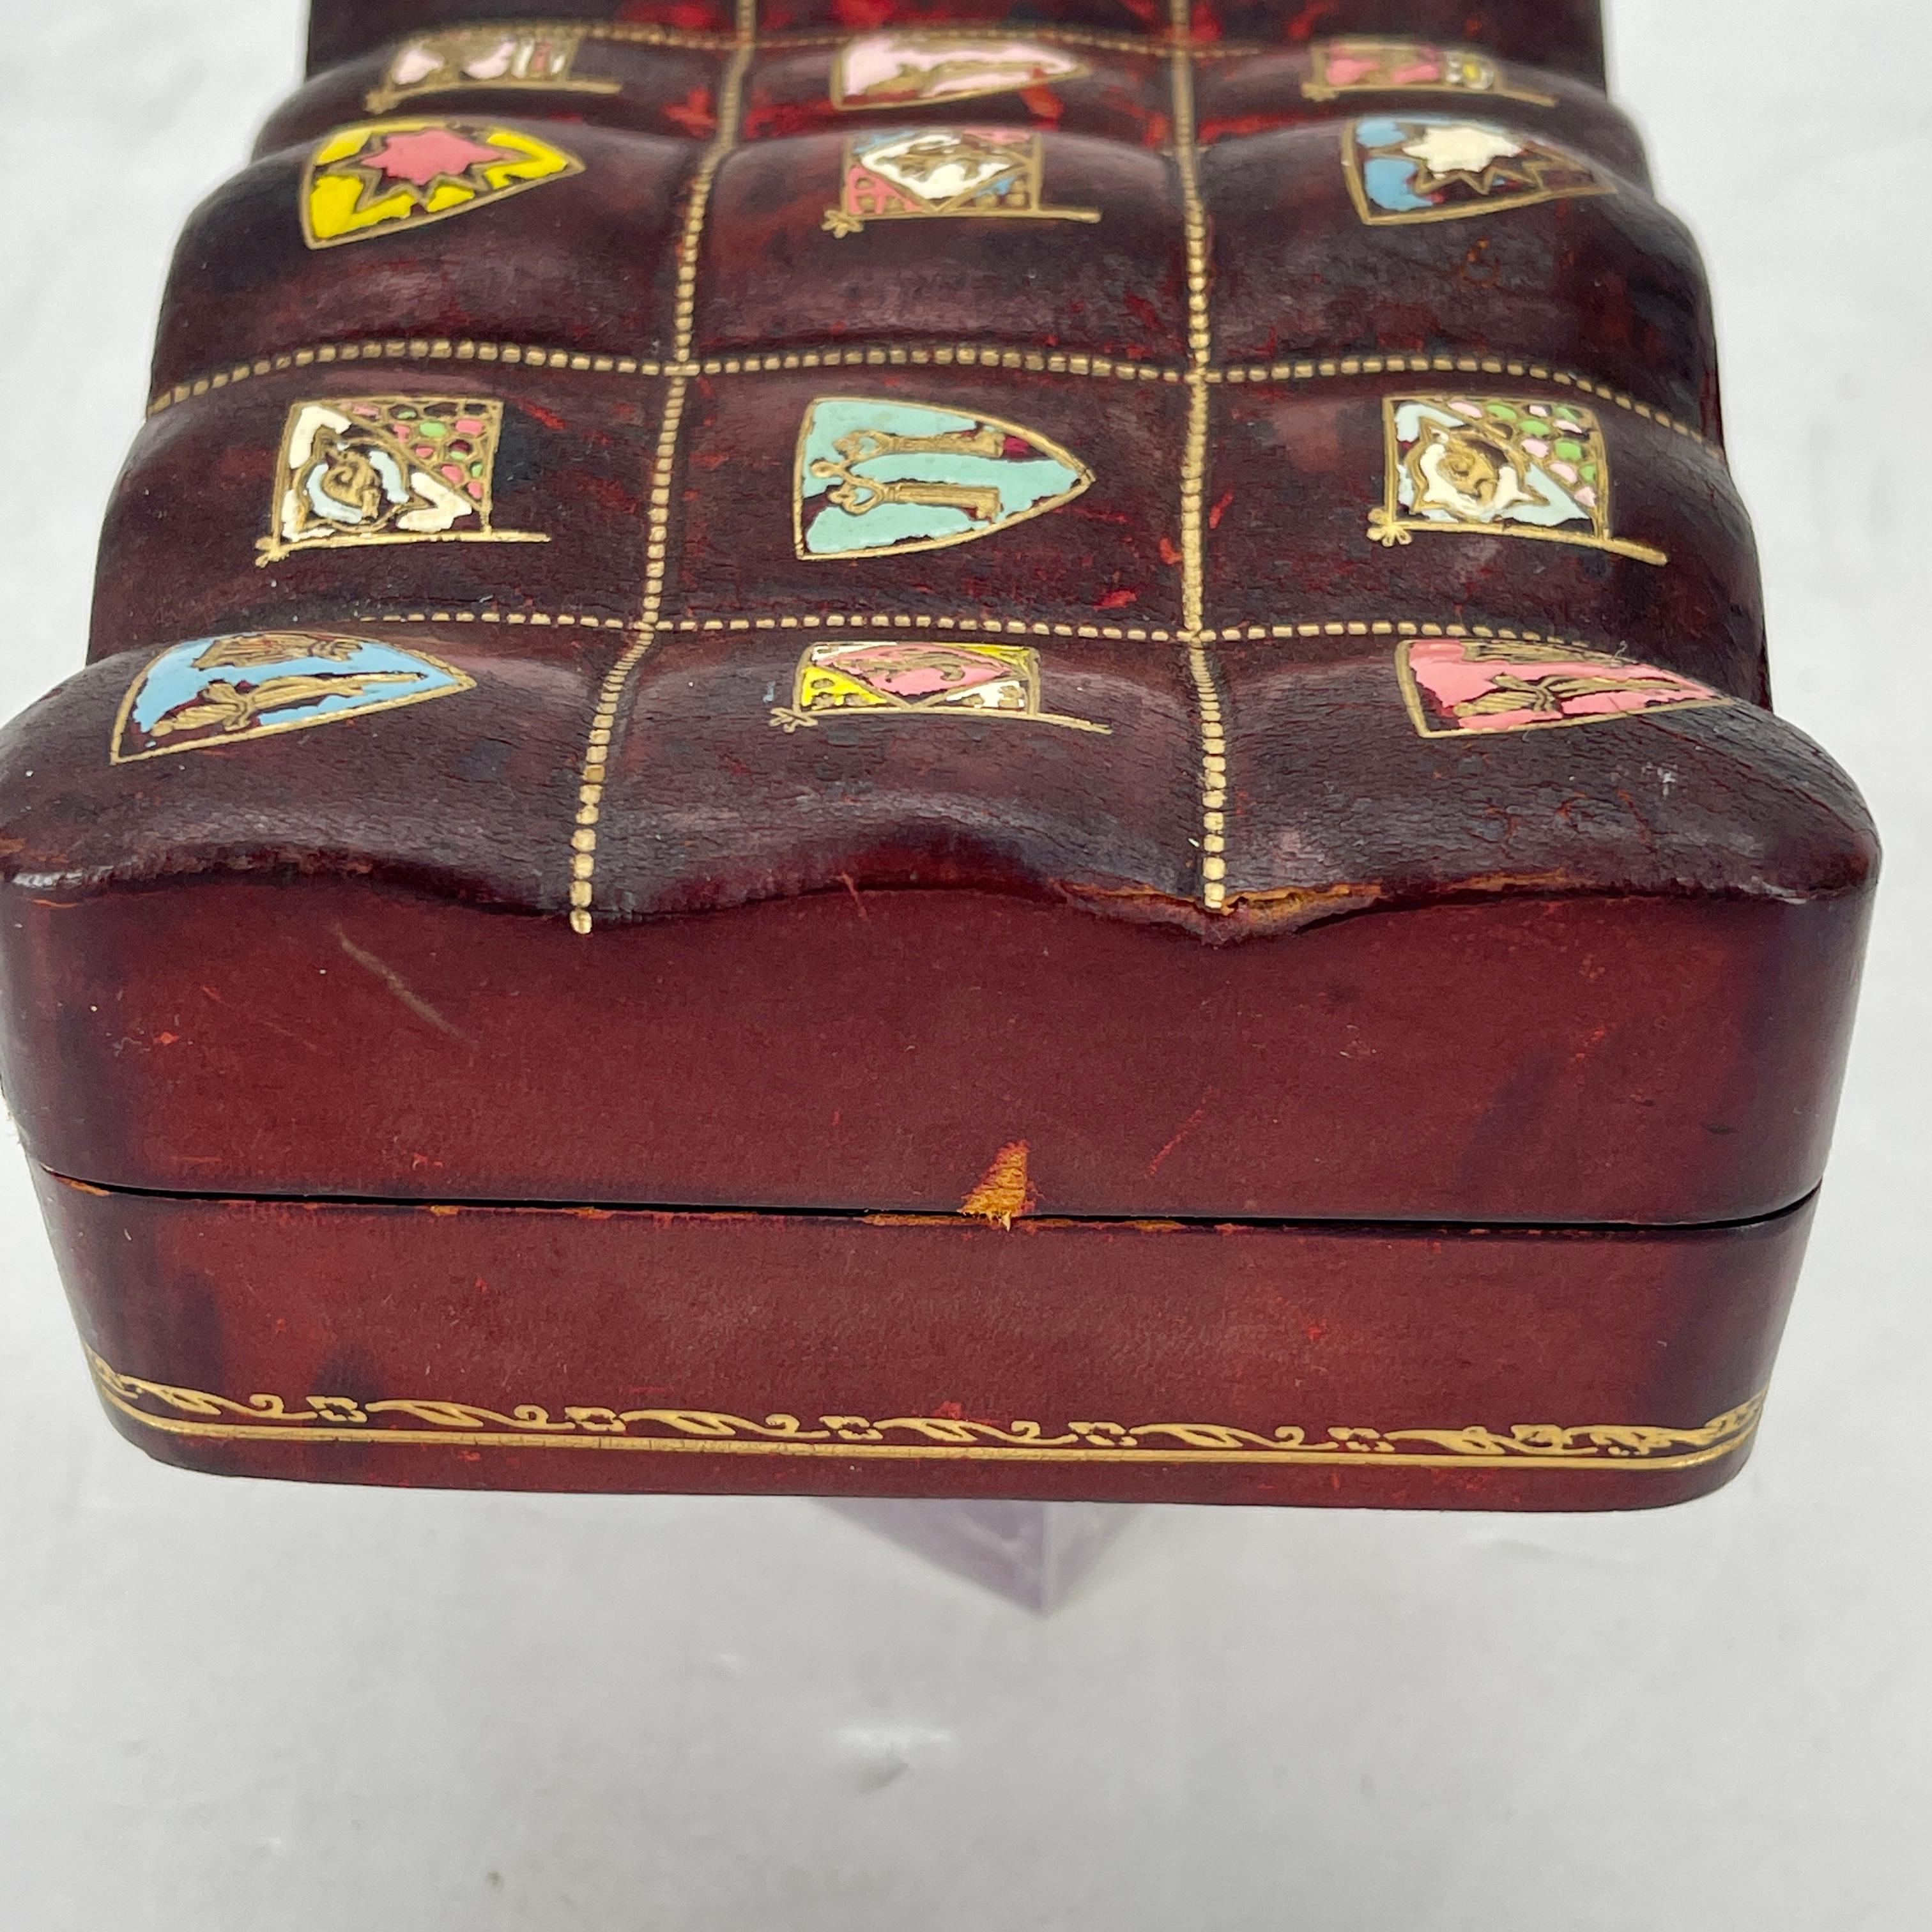 Vintage Italian Jewelry Box in Burgundy Leather, Circa 1950's For Sale 1